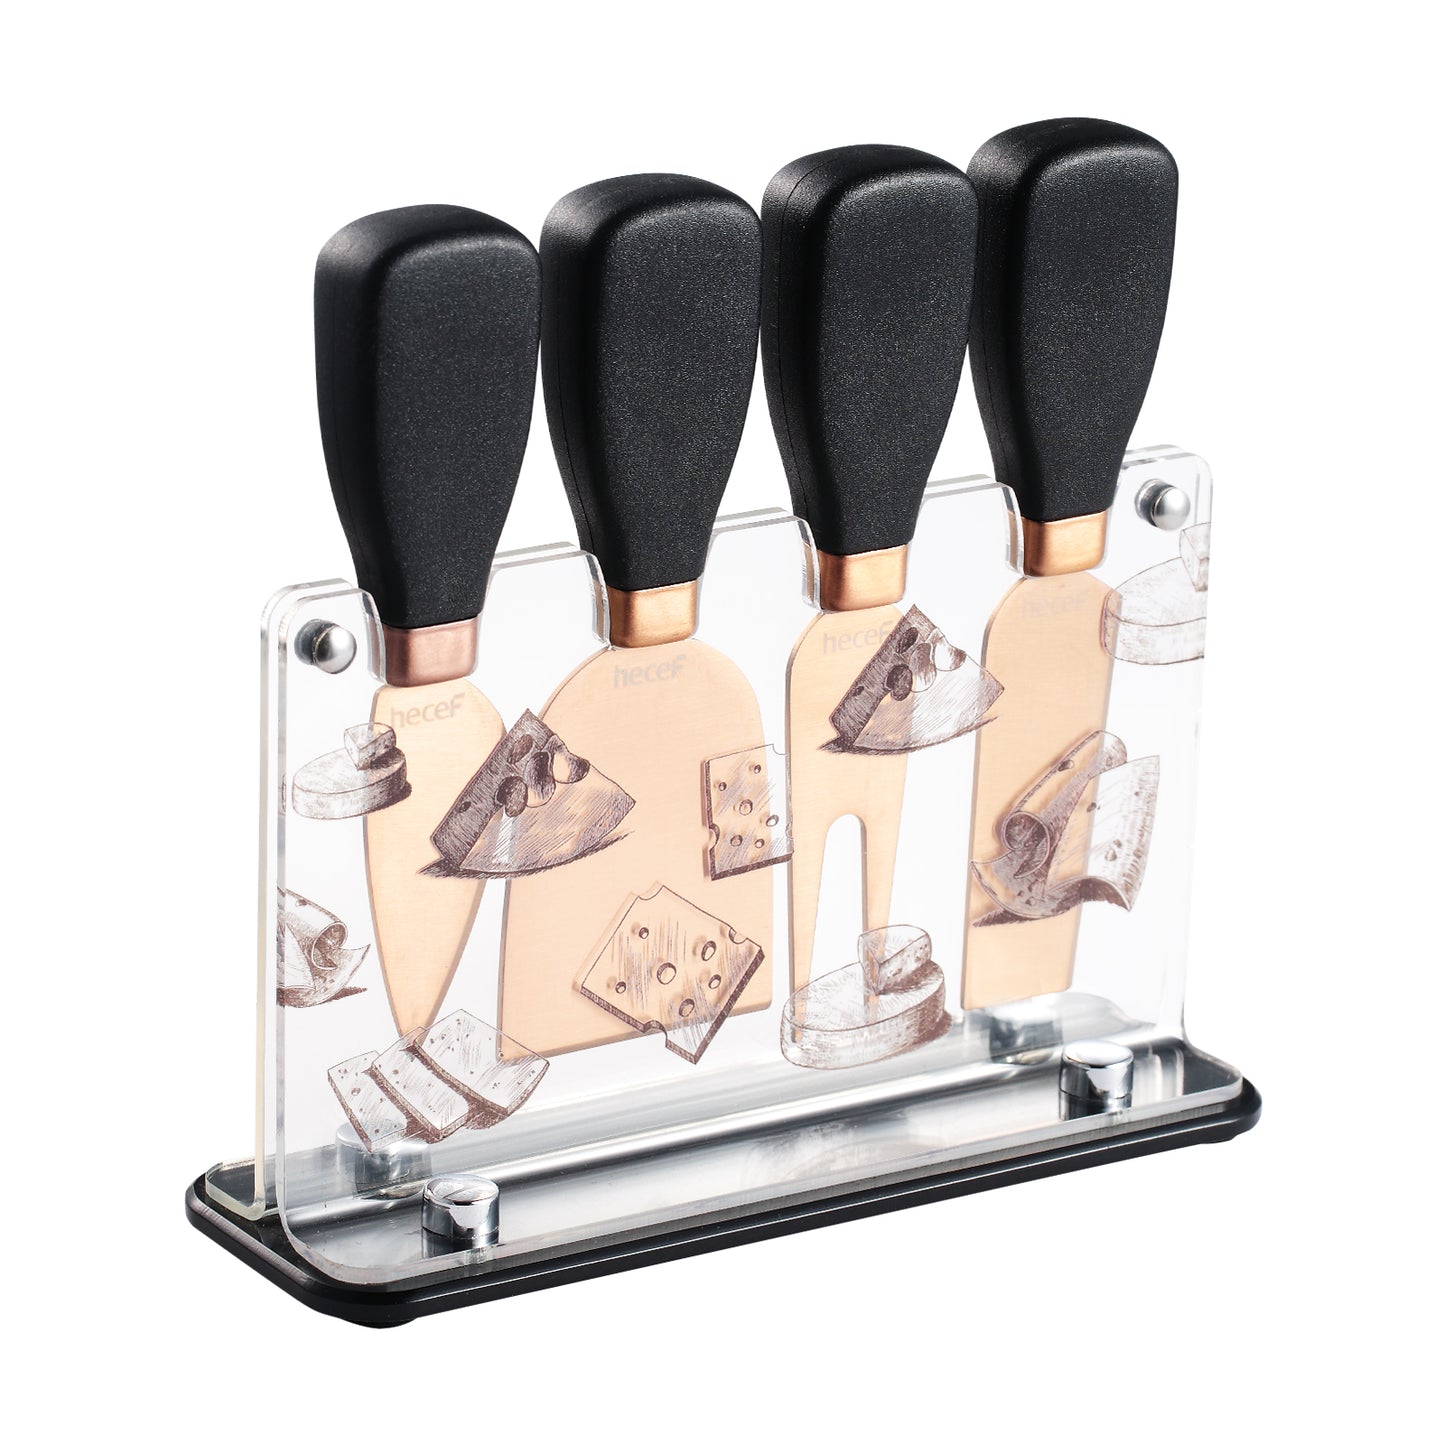 Hecef Kitchen Black Golden Cheese Knife Set of 5 with Acrylic Stand - Hecef Kitchen